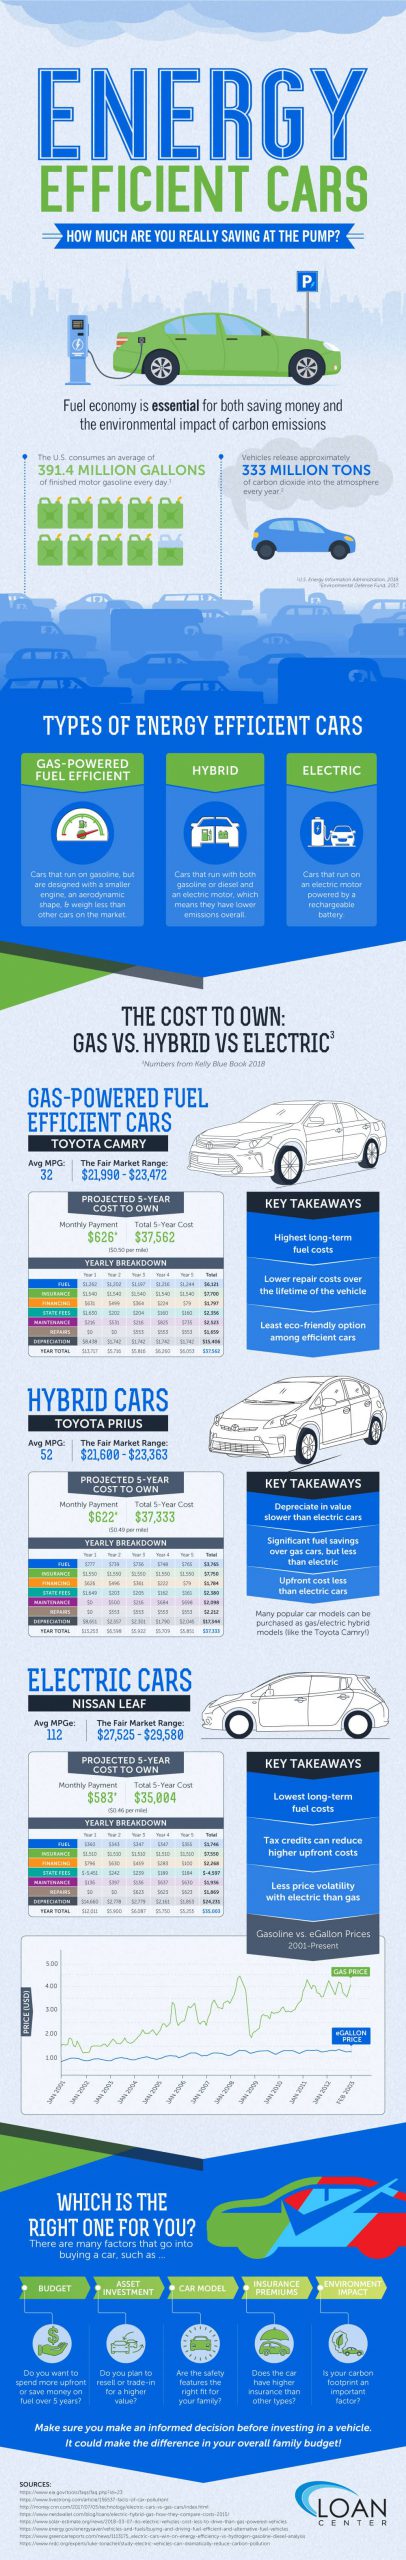  Energy-Efficient-Cars-Infographic